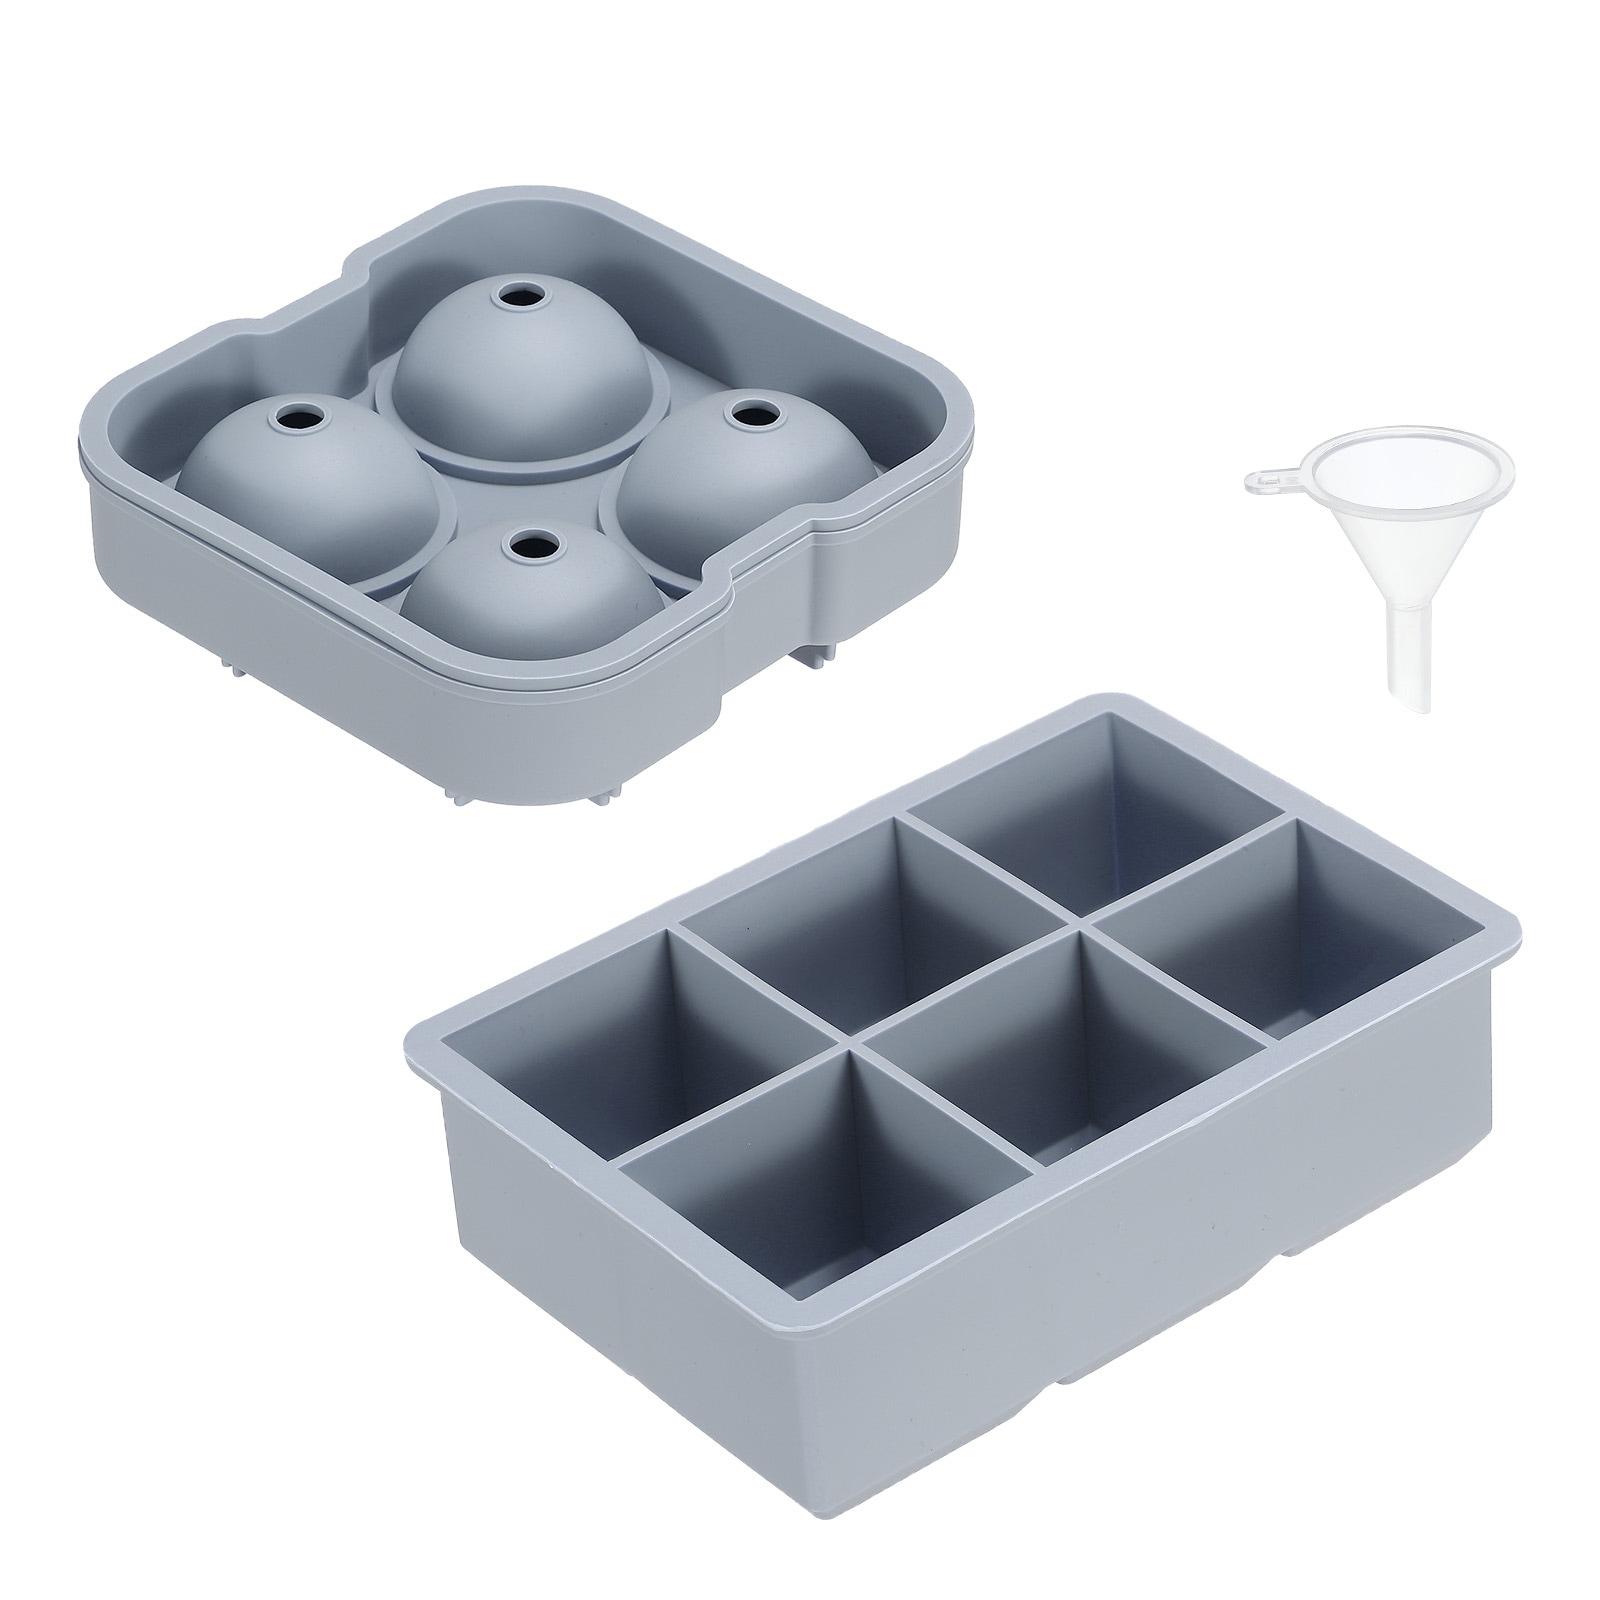 11 Blue Grids Ice Cube Tray with Lid, Ice Trays Ice Maker for